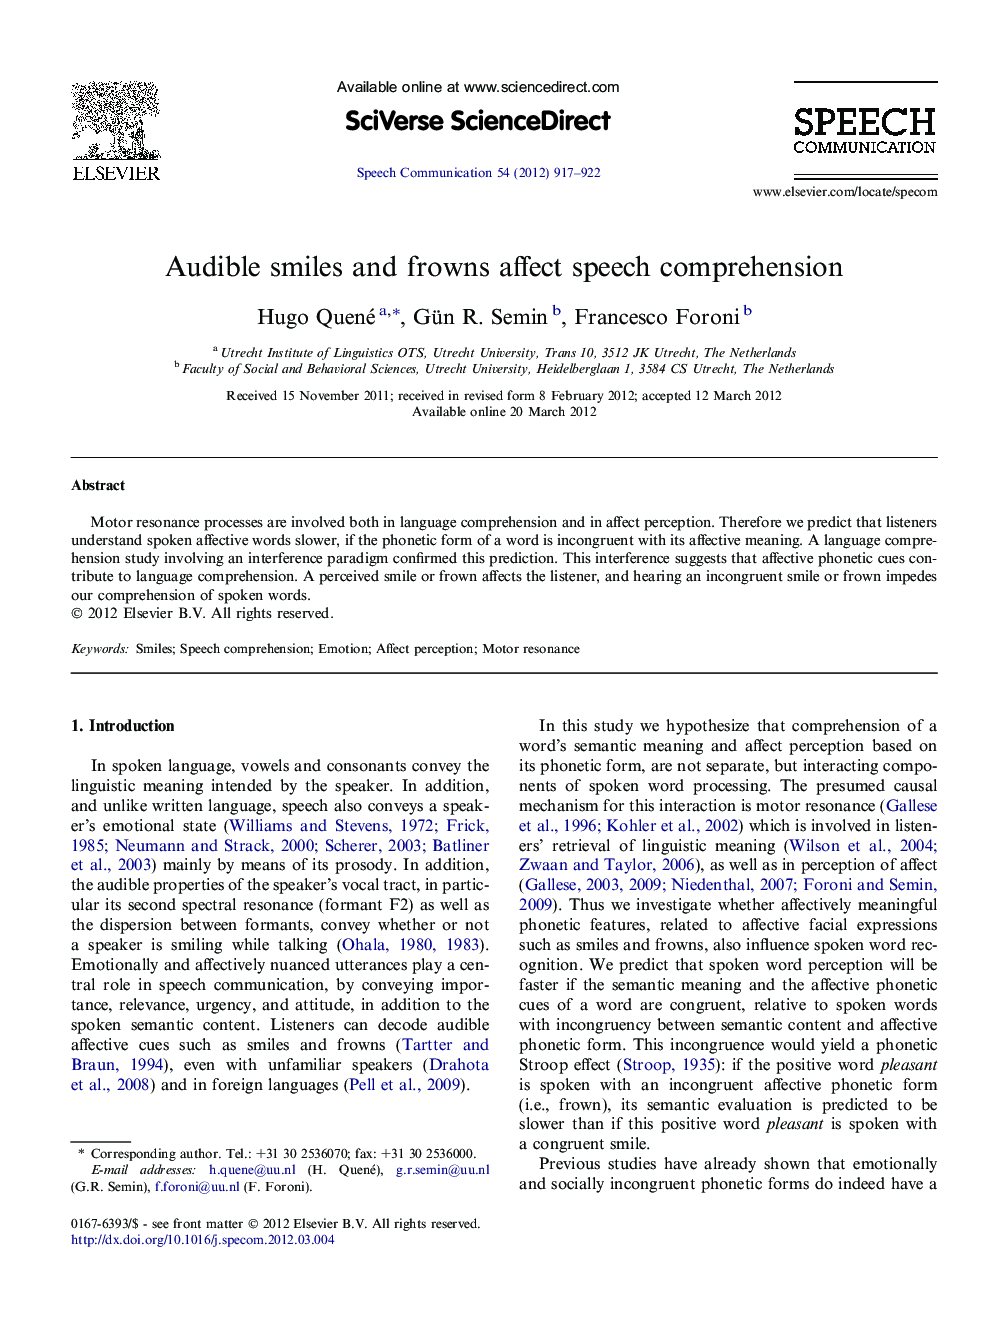 Audible smiles and frowns affect speech comprehension